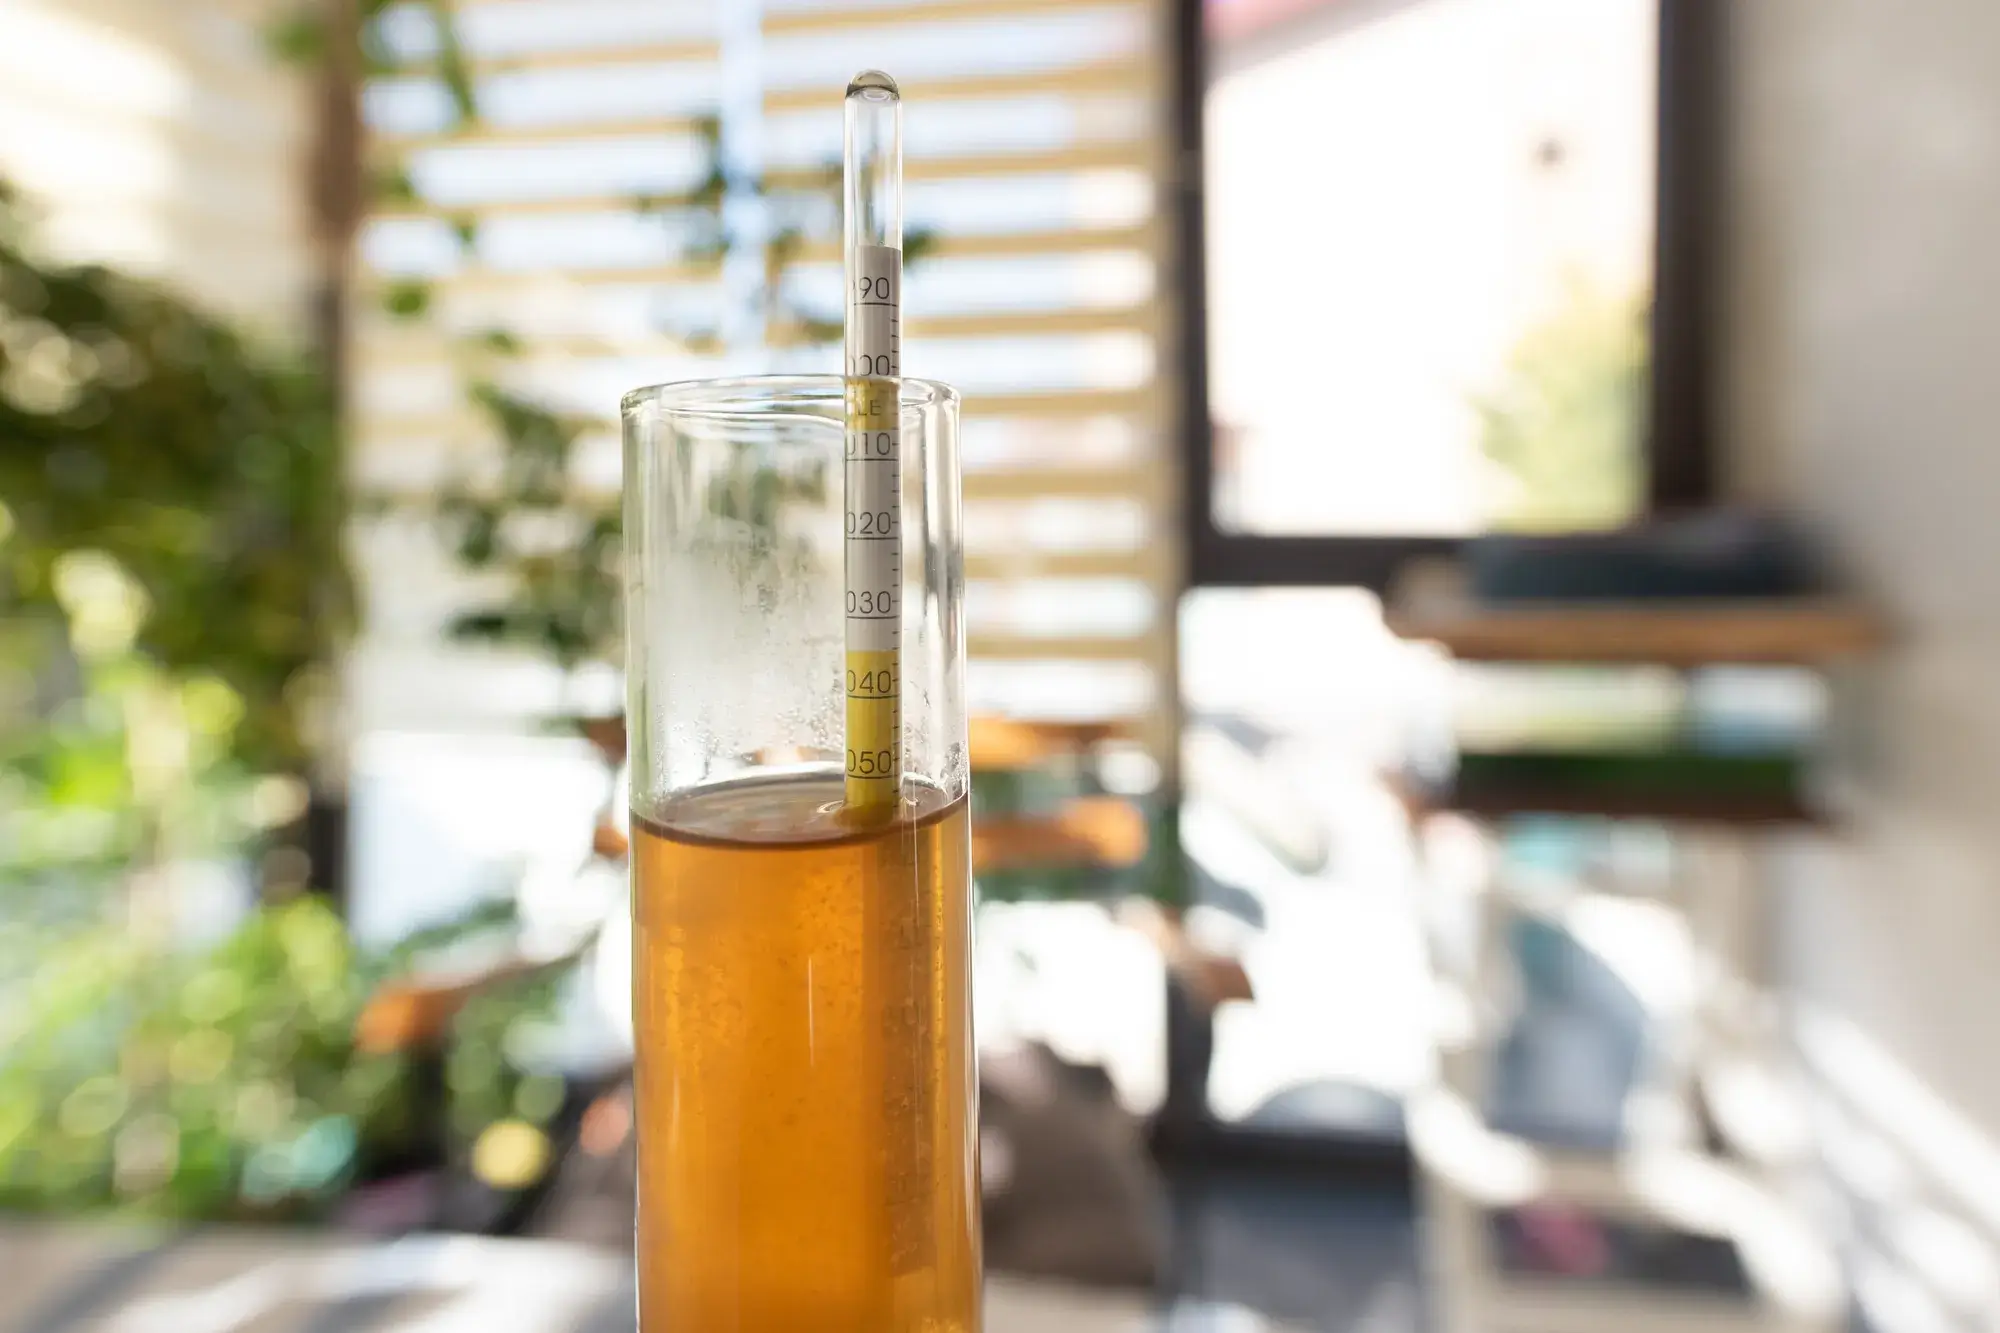 Measuring the specific gravity with a hydrometer